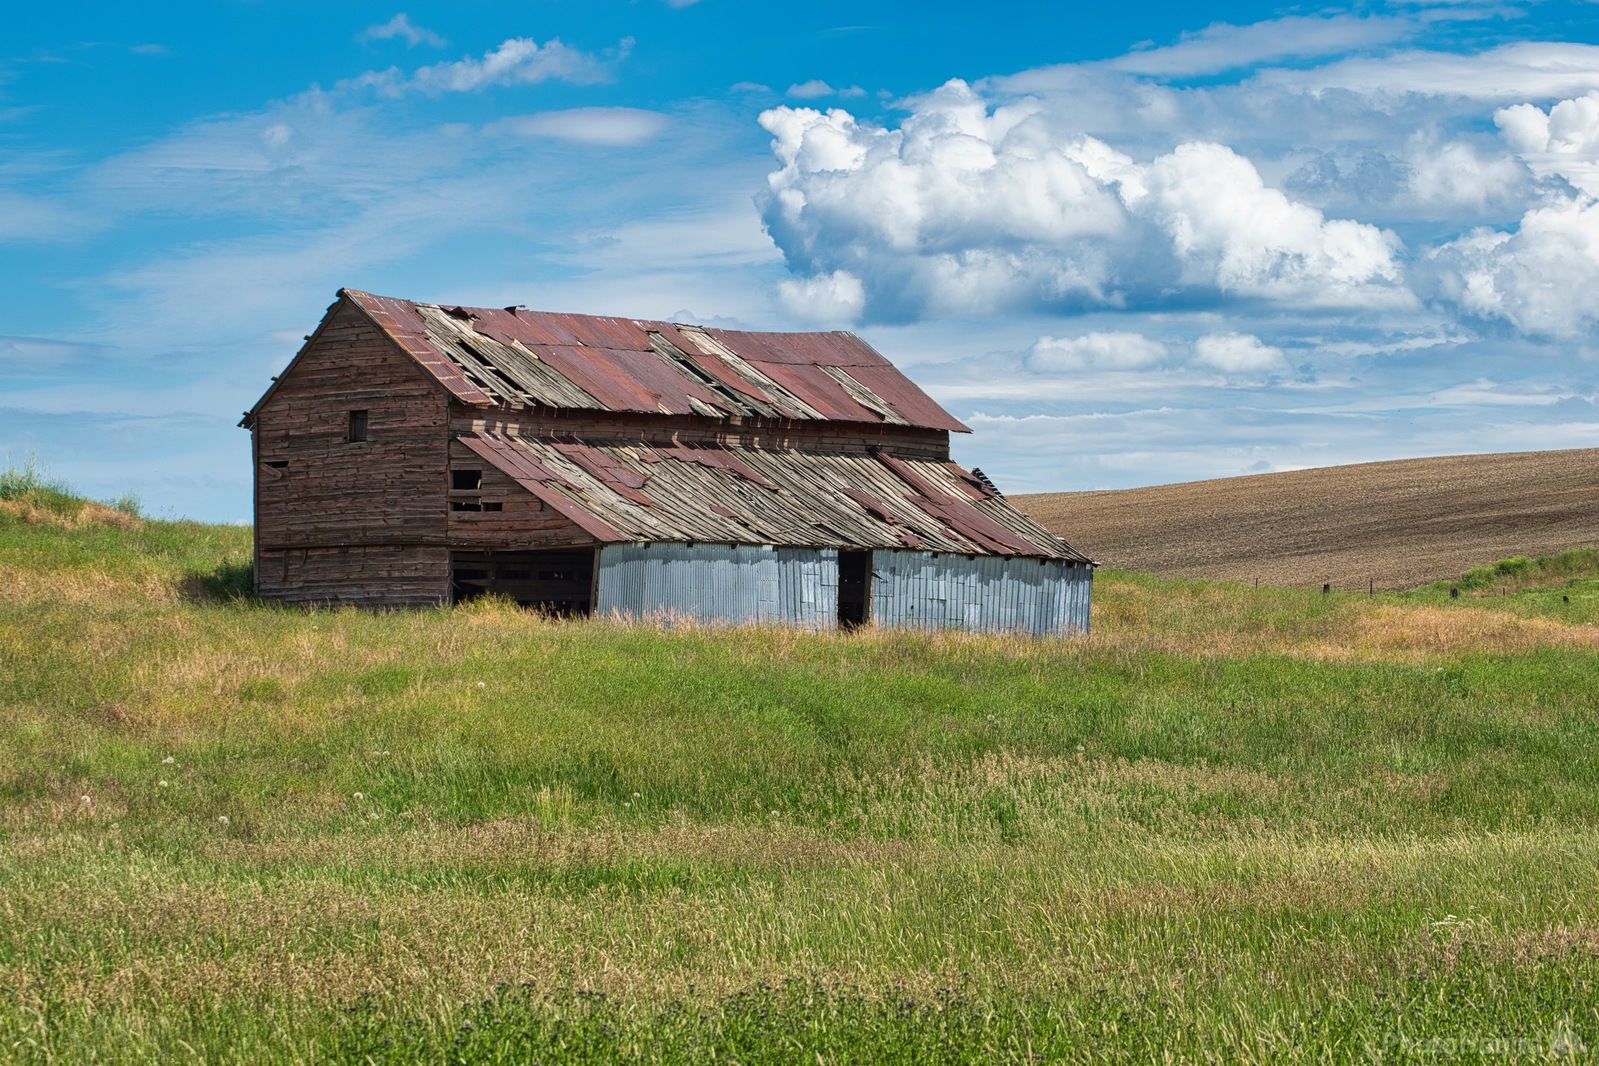 Image of The 1916 Barn by Steve West